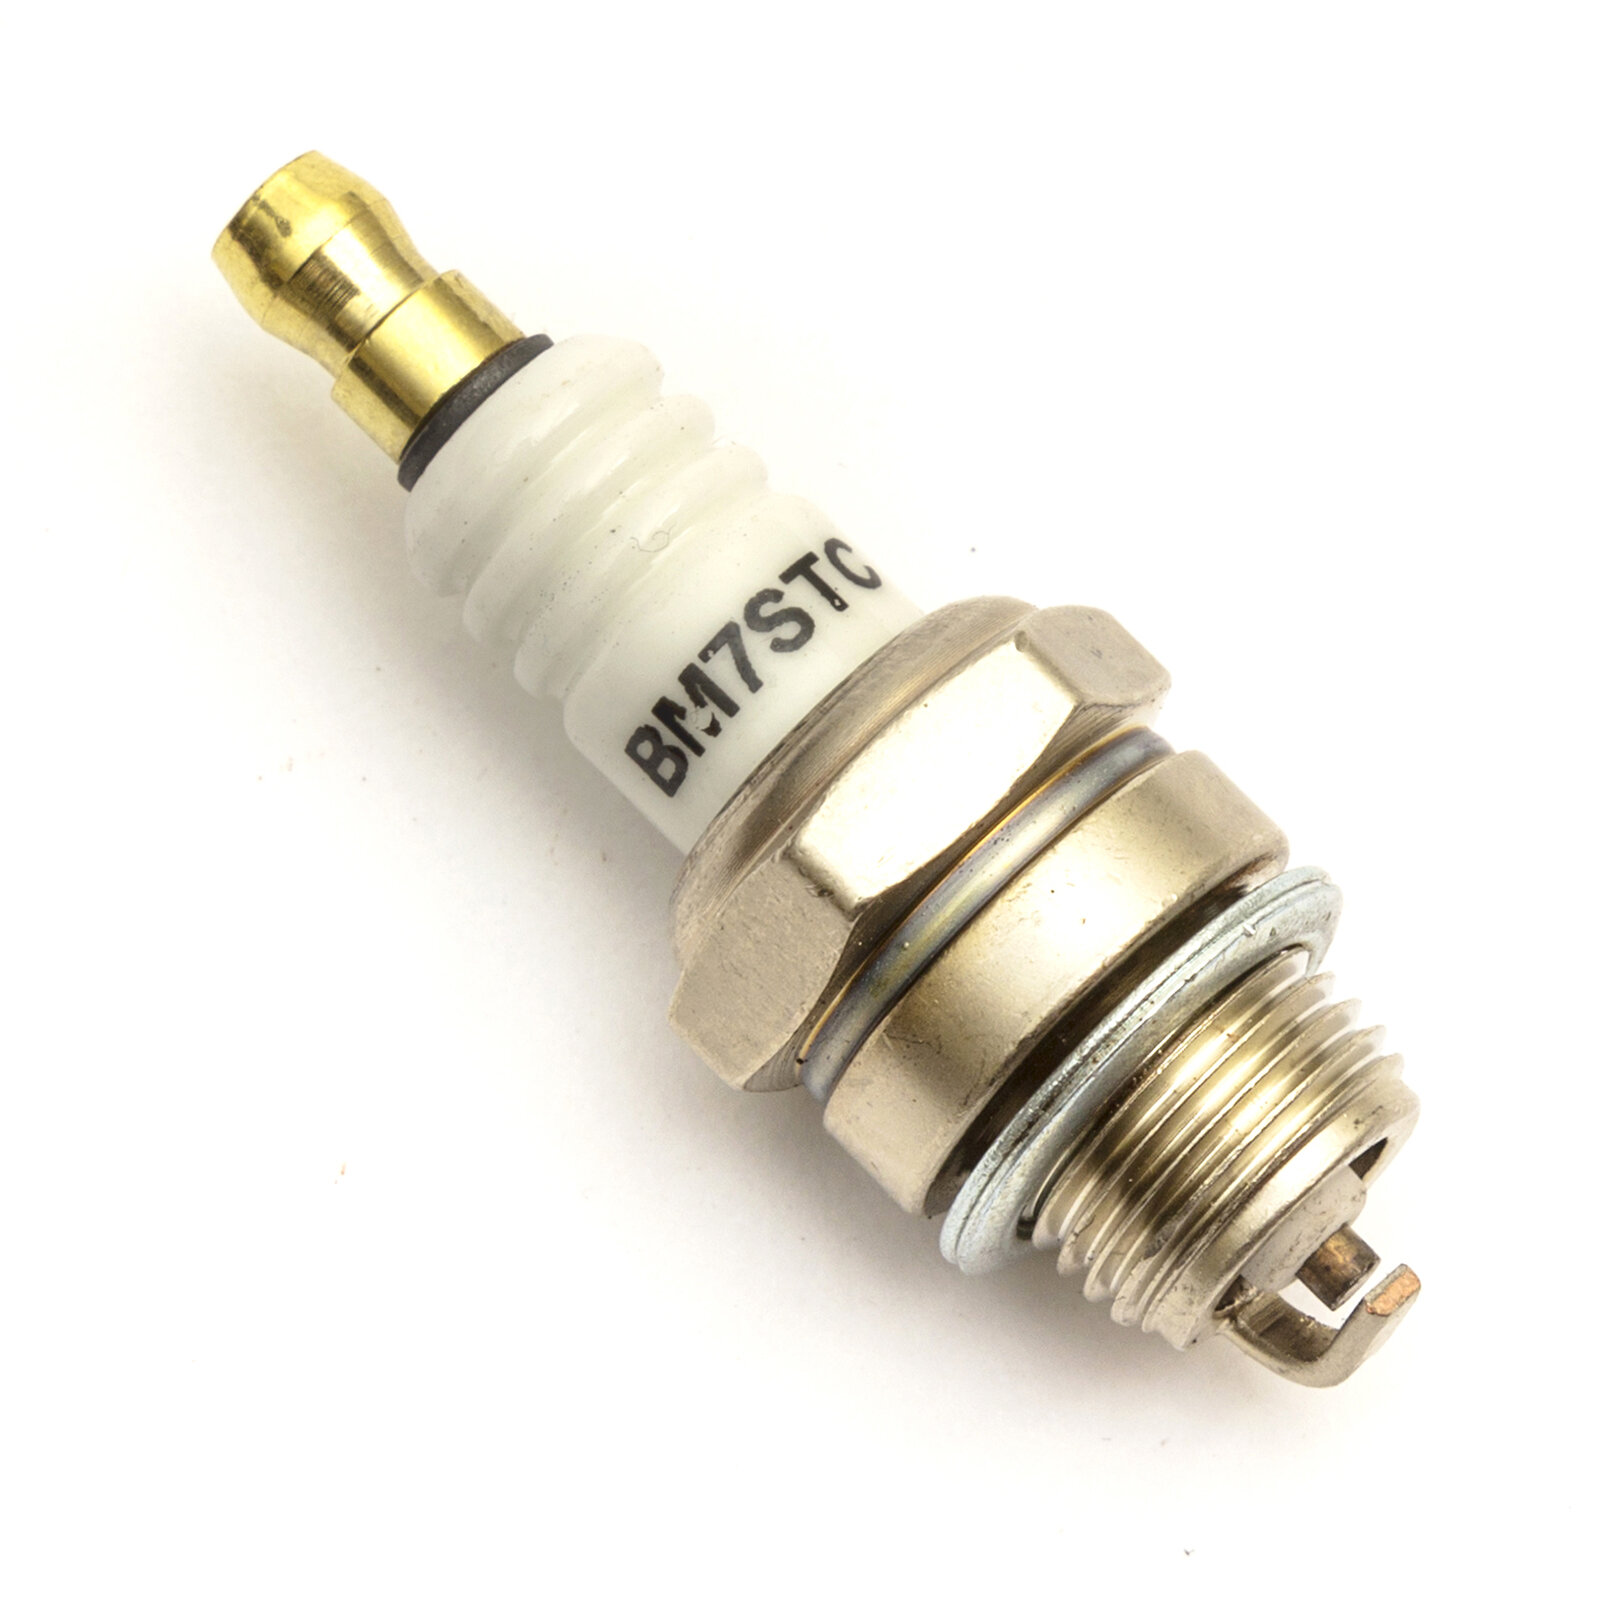 Torch Takumi Spark Plug Replaces NGK BPMR7A Fits Stihl MS310 & MS311 Chainsaw